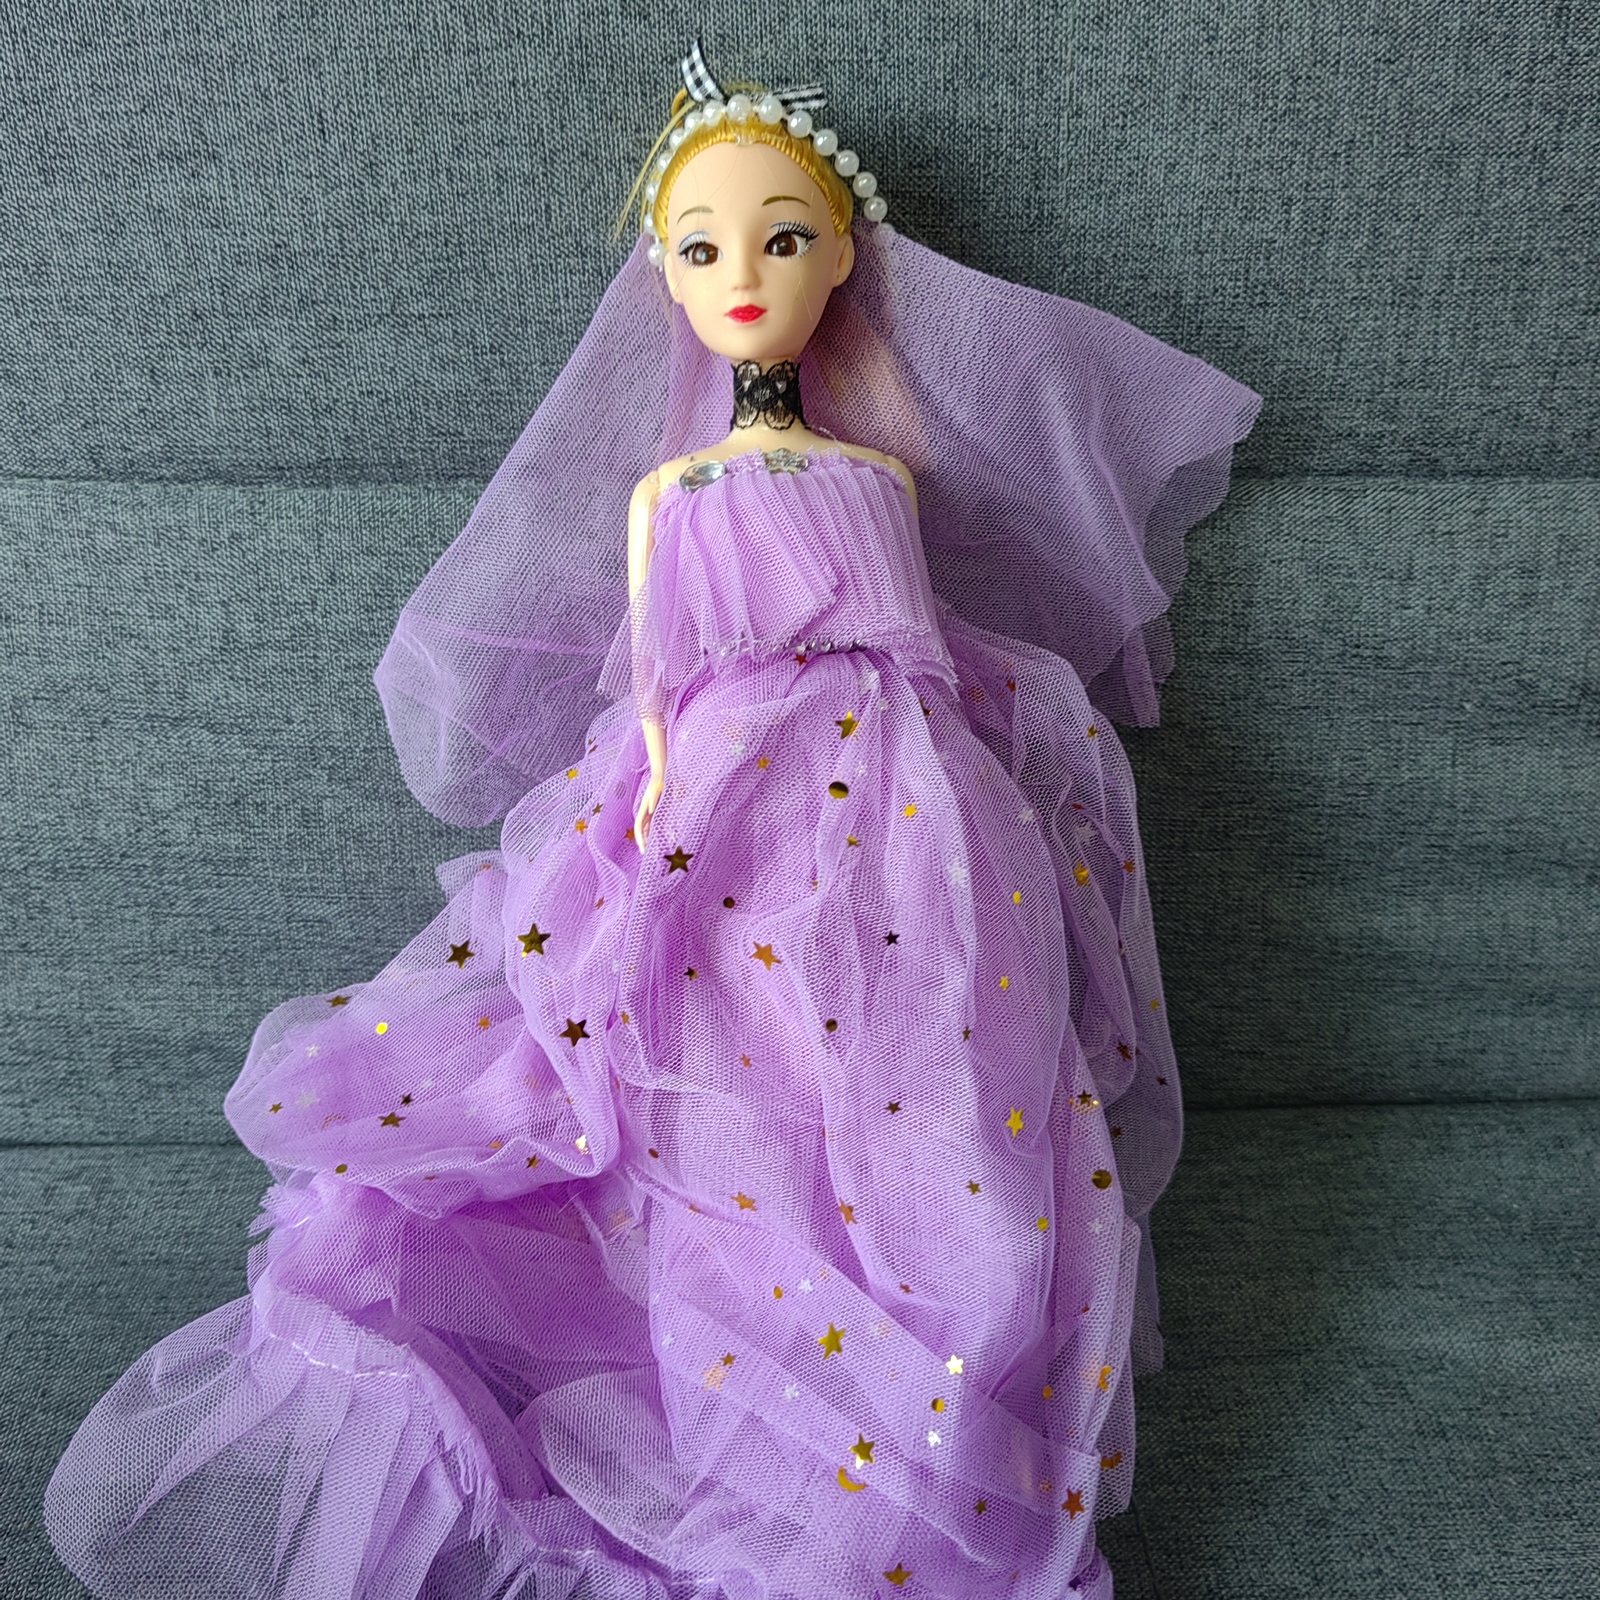 Primary image for VLZPTR Dolls, A beautiful princess doll in a long dress